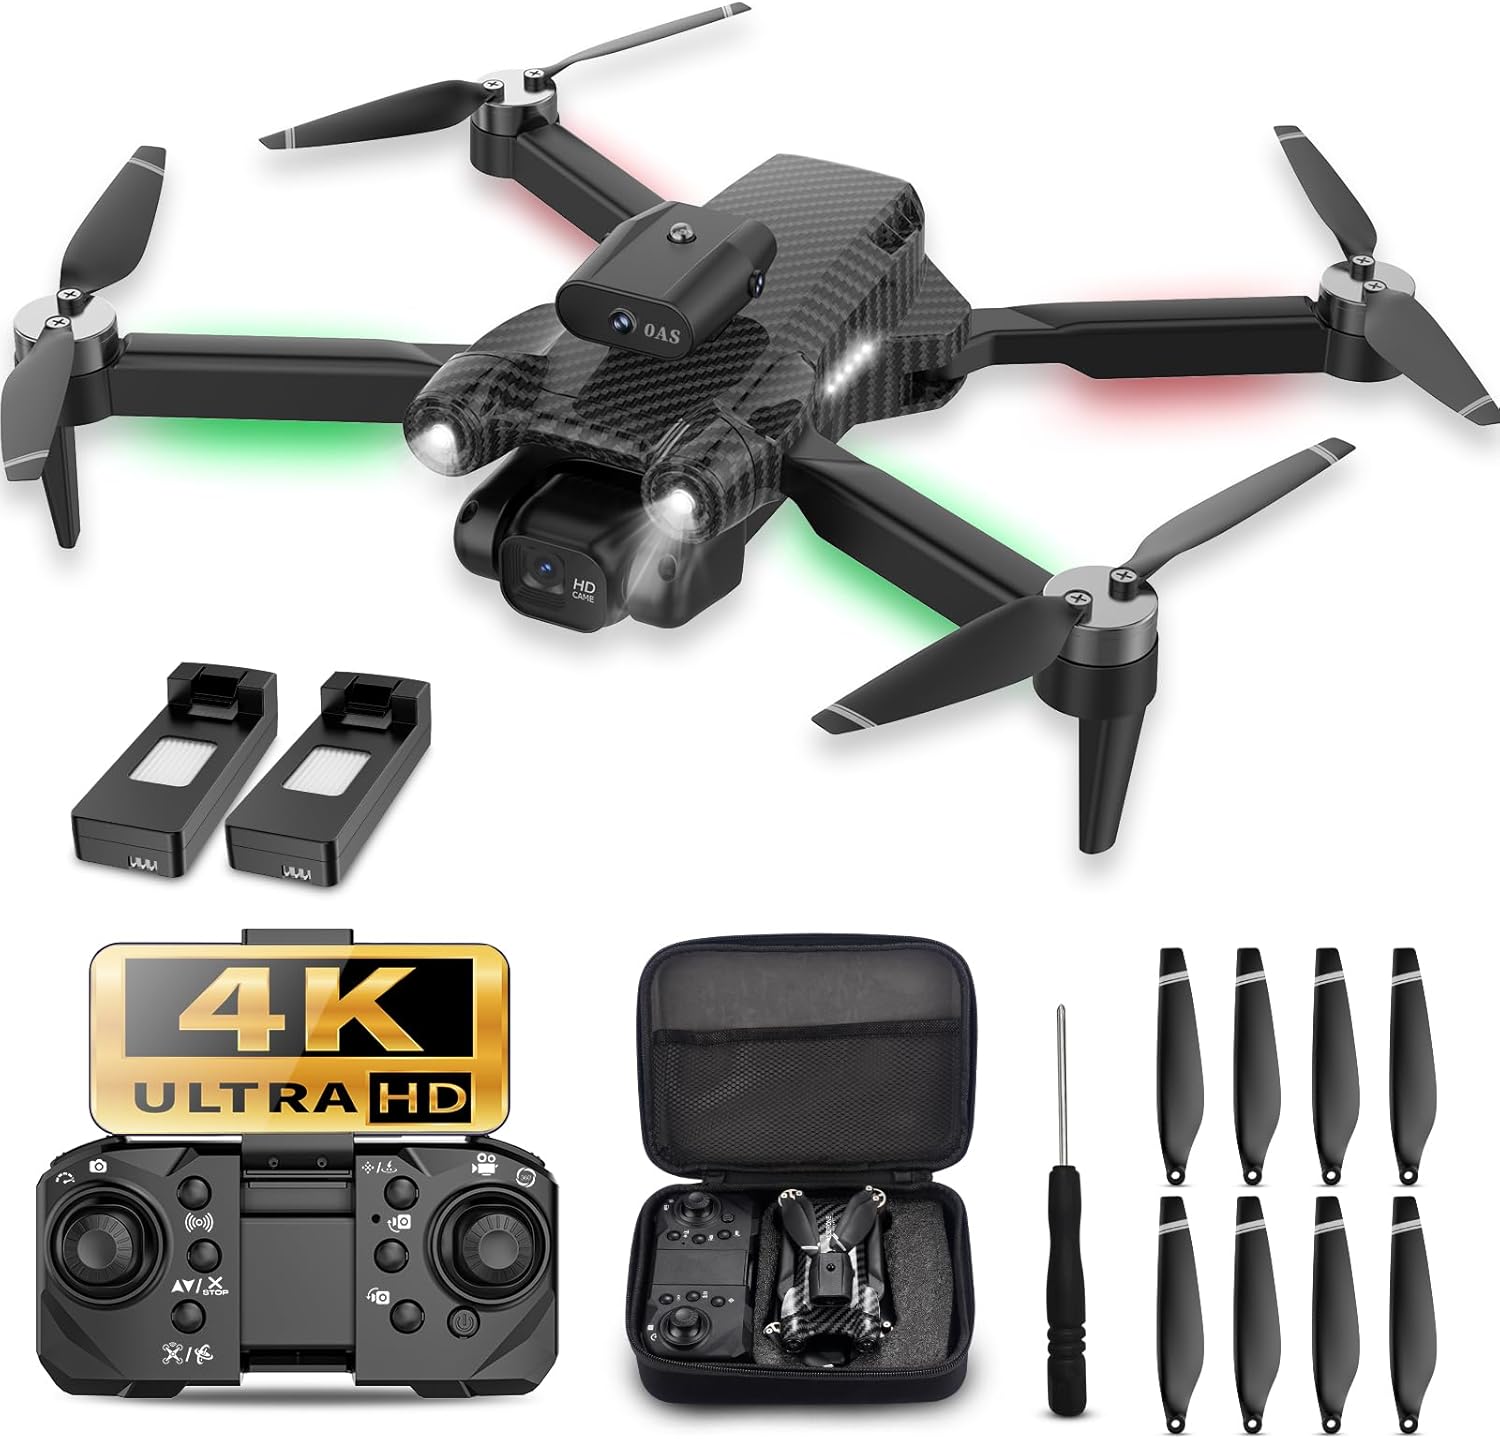 RC Drone for Kids Adults with HD FPV Camera,Obstacle Avoidance, One Key Start, Carrying Case, 3 Batteries – Cool Toys Gifts for Boys Girls